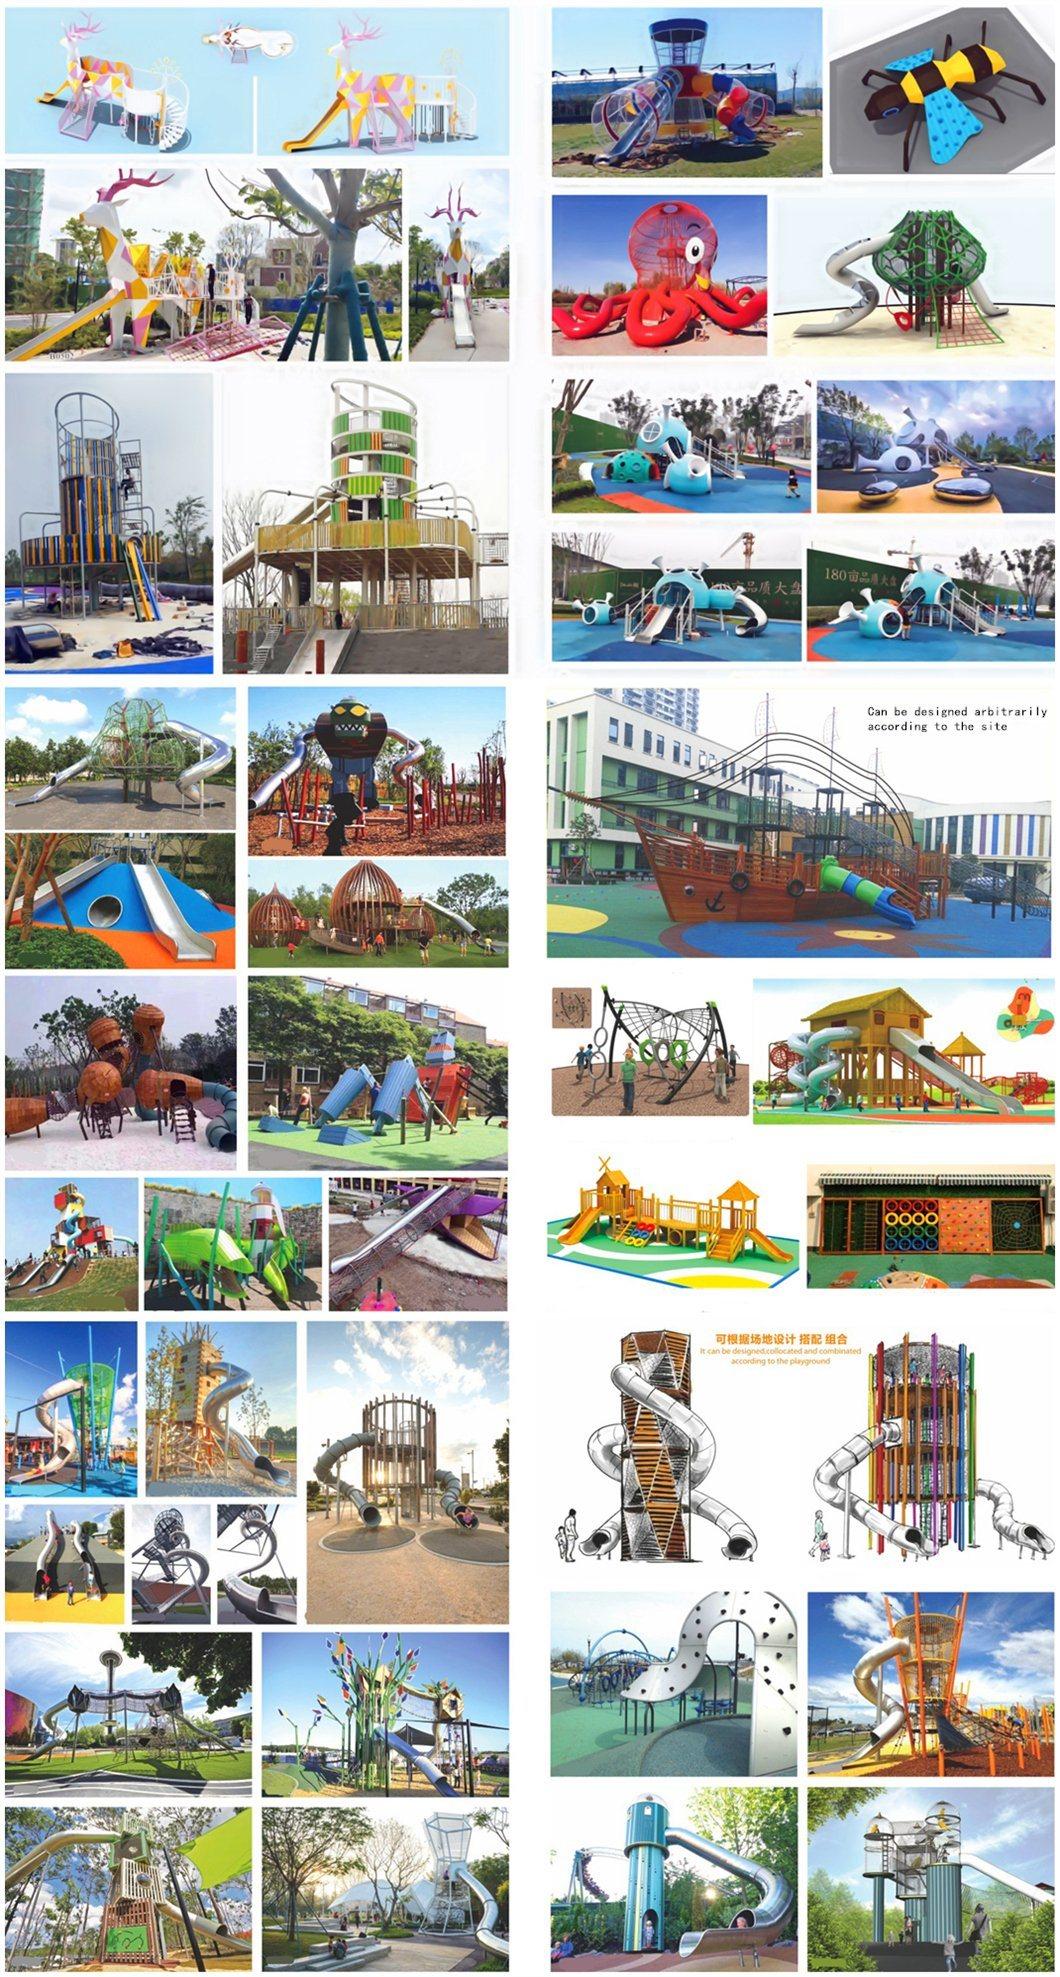 Outdoor Kids Climbing Frame Crawling Park Scenic Playground Equipment